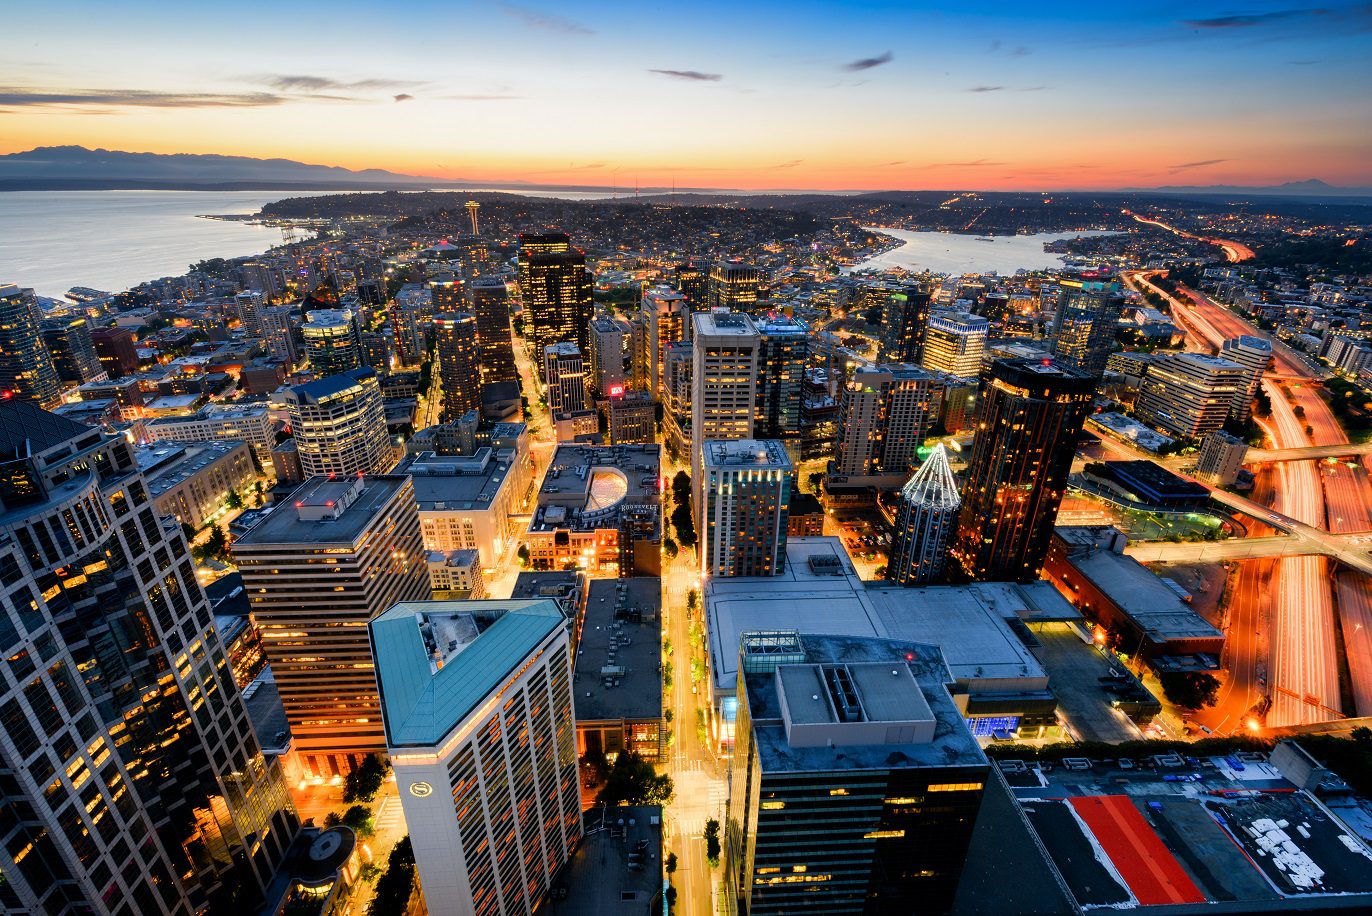 View of downtown Seattle at sunset, looking north. Elliott Bay is visible to the left, Lake Union in the center, and Interstate 5 to the right.